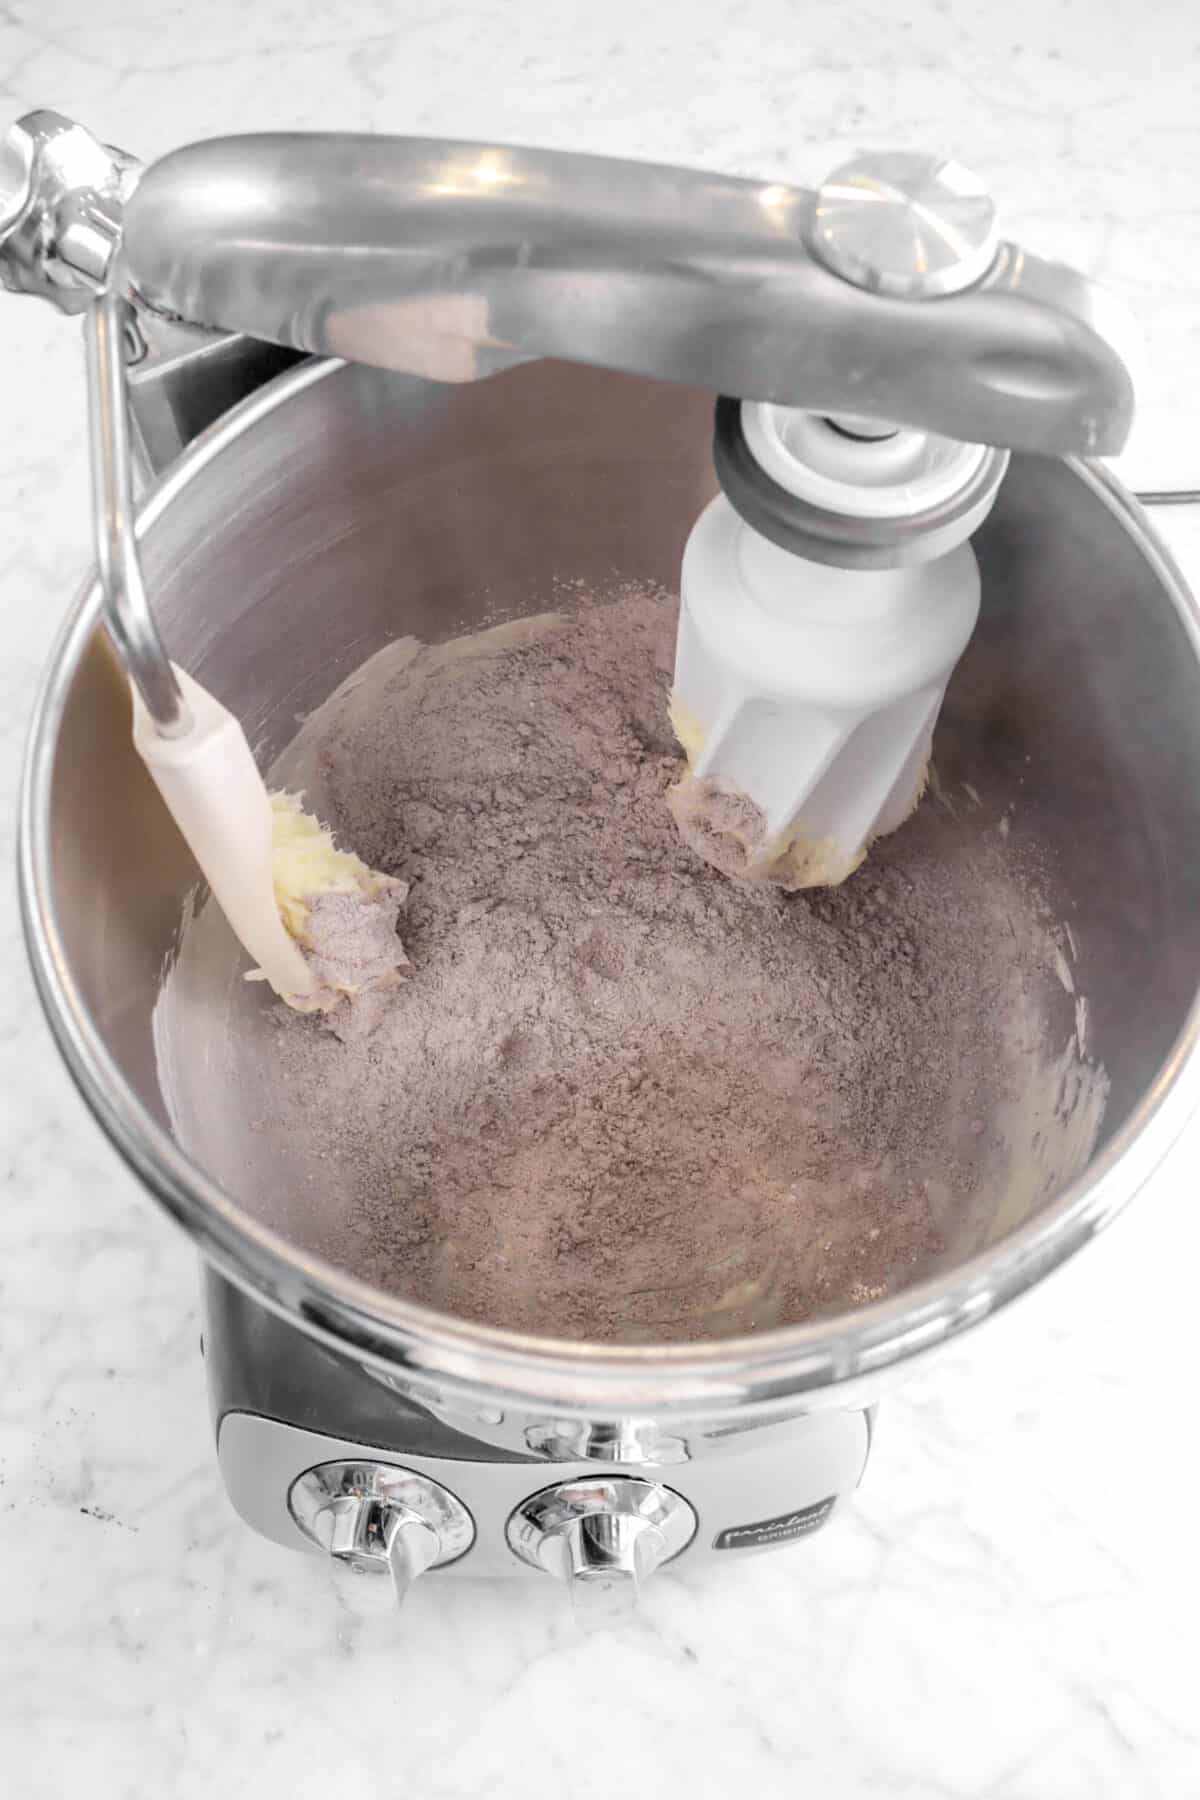 cocoa powder mixture added to butter